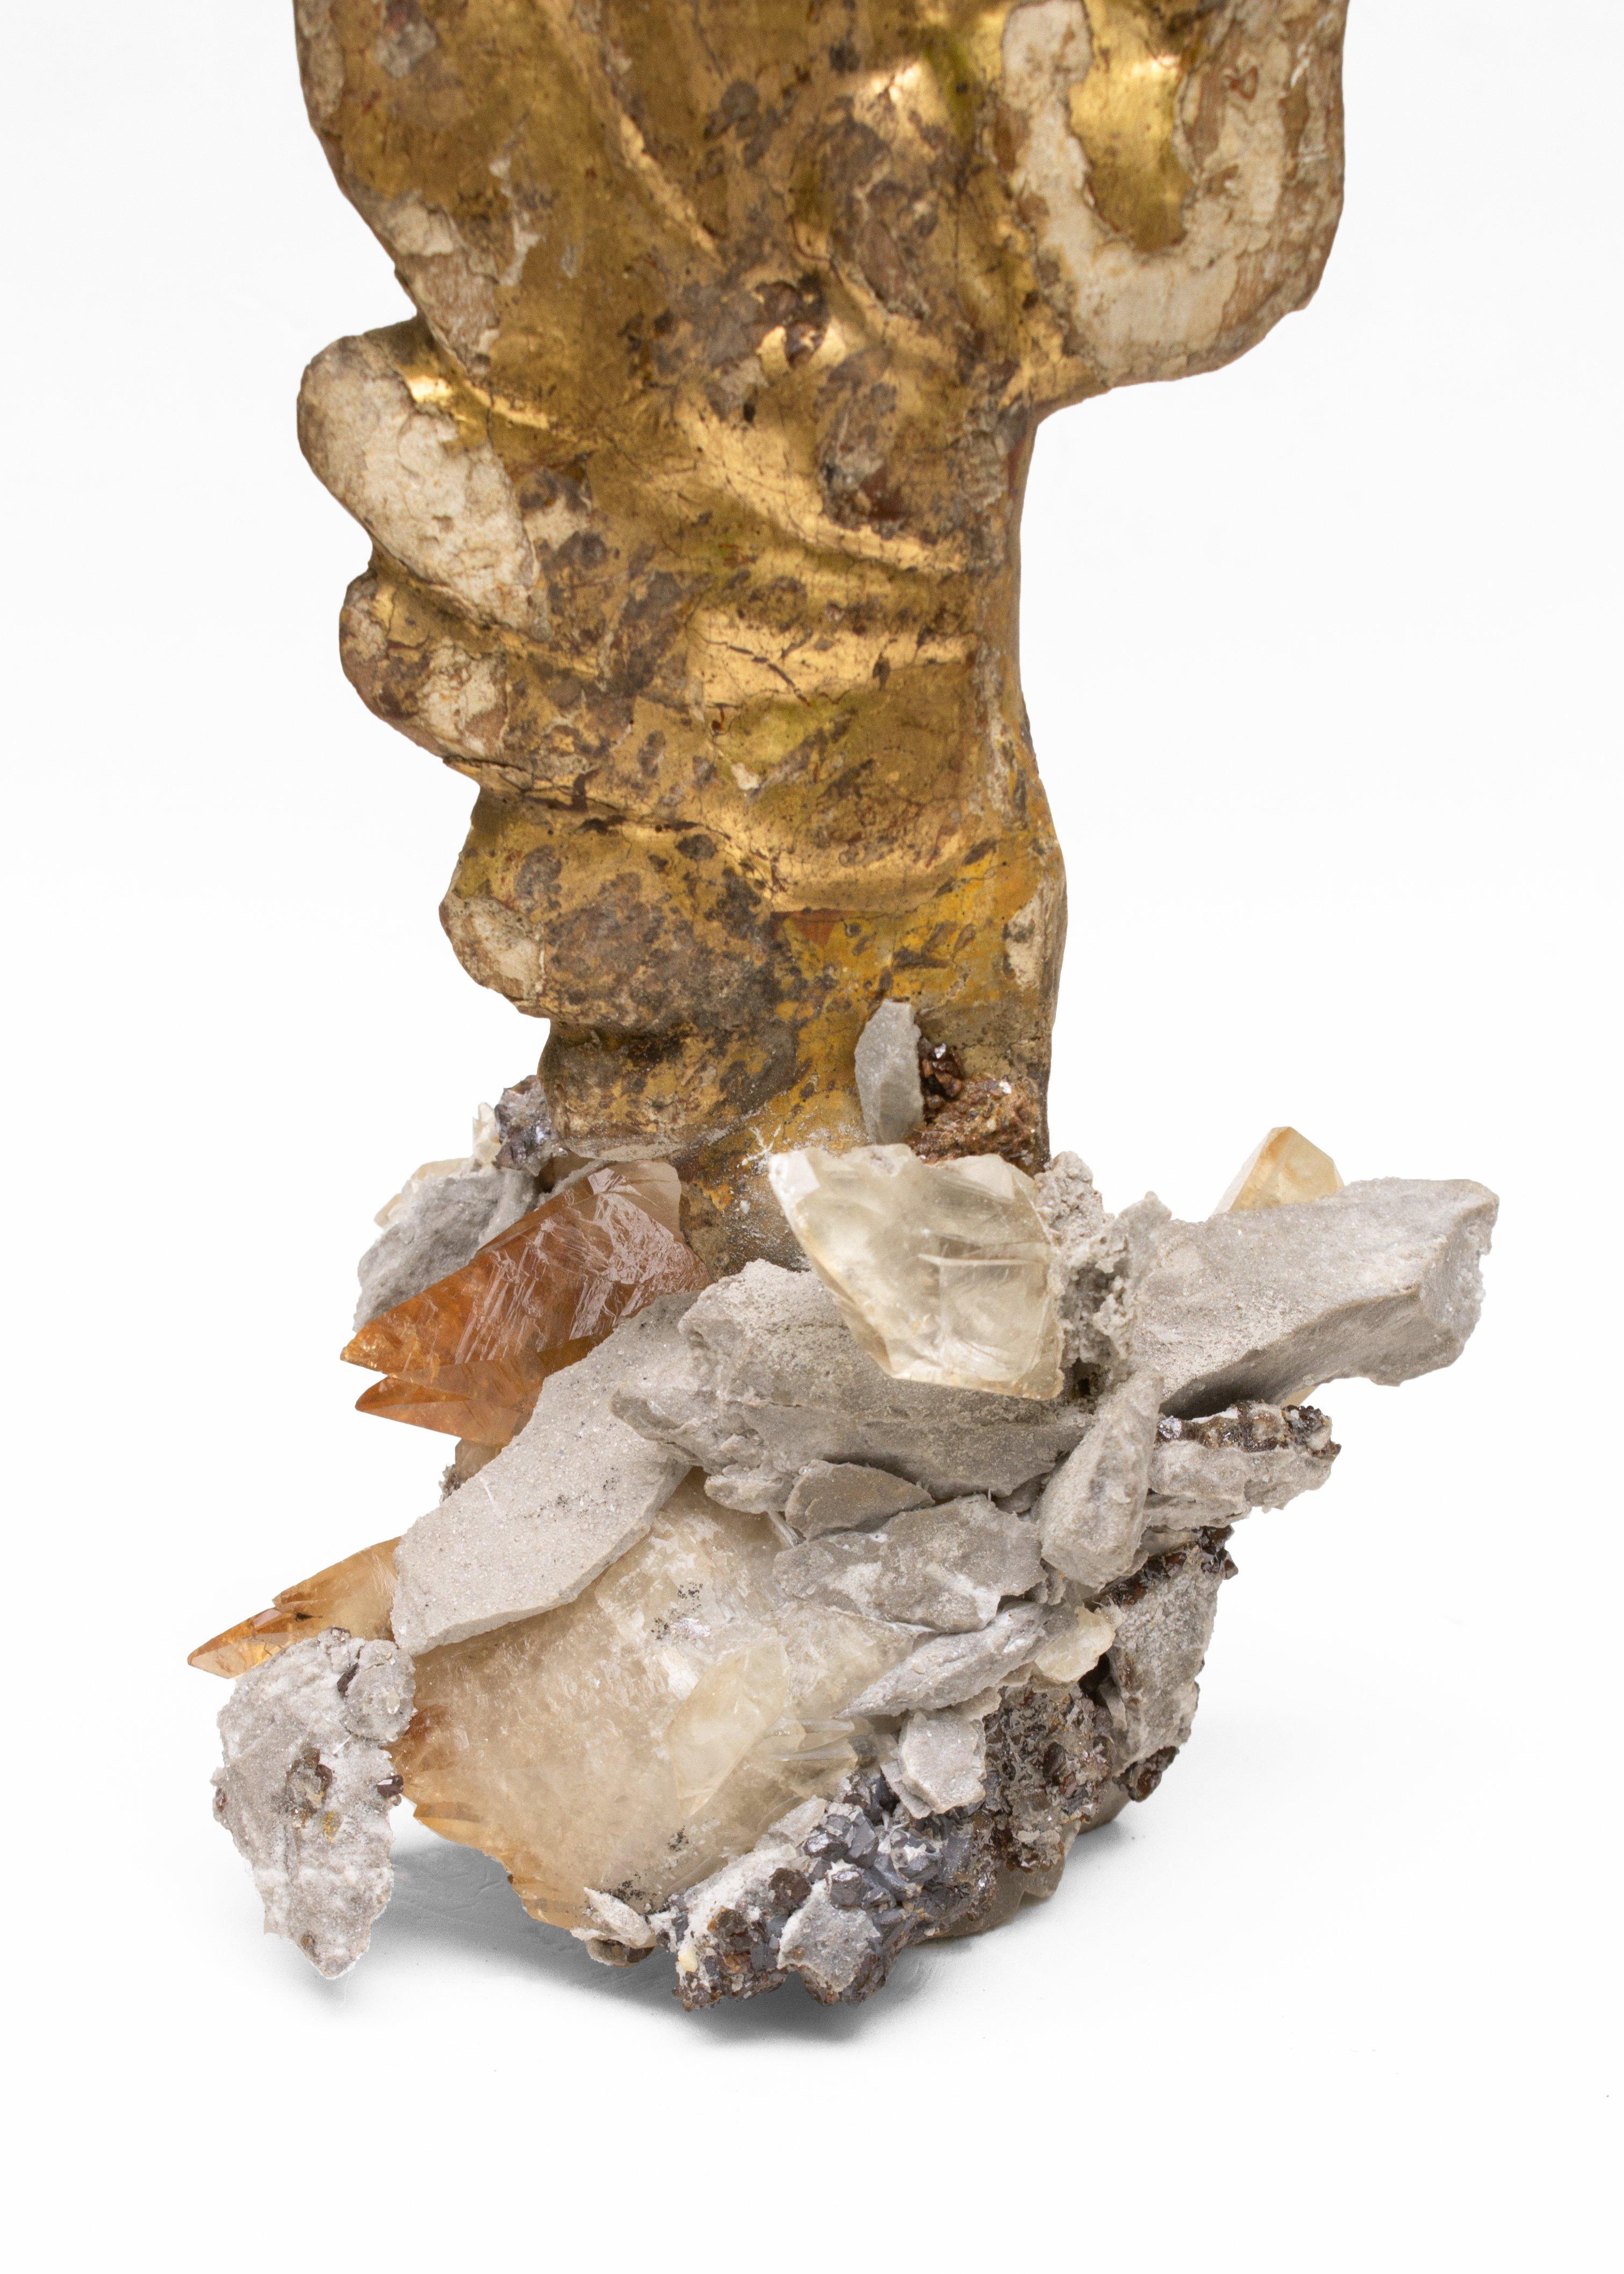 18th century Italian hand carved angel wing on calcite crystals in a matrix of sphalerite.

The hand carved gold leaf angel wing is originally from a church in Tuscany. The ecclesiastical artifact is adorned with calcite crystals in a matrix of